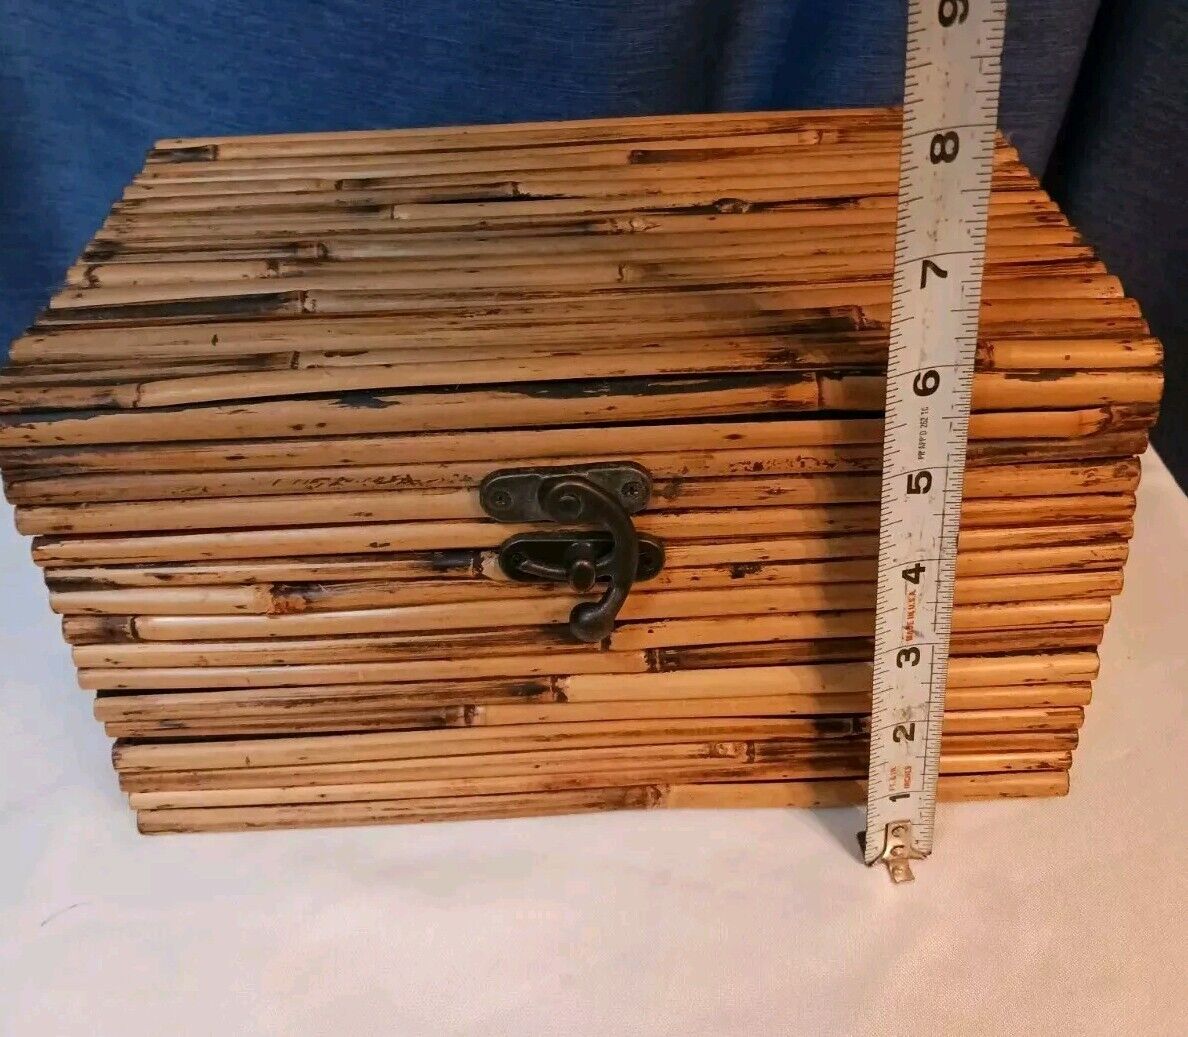 Unique Bamboo Box With Hinge Lid Vintage Petite Storage Container